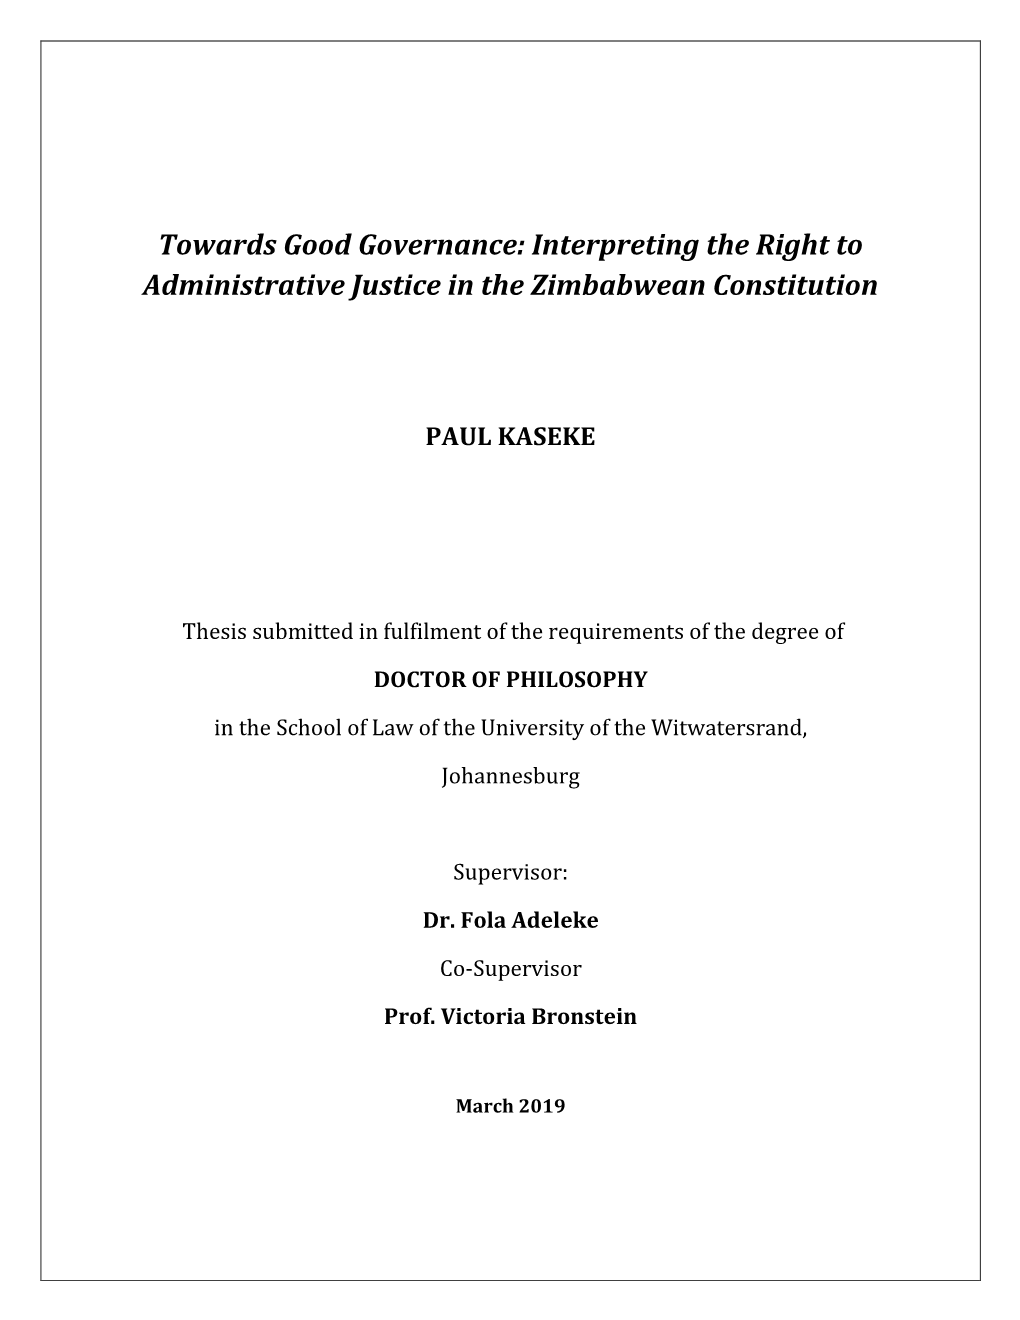 Interpreting the Right to Administrative Justice in the Zimbabwean Constitution